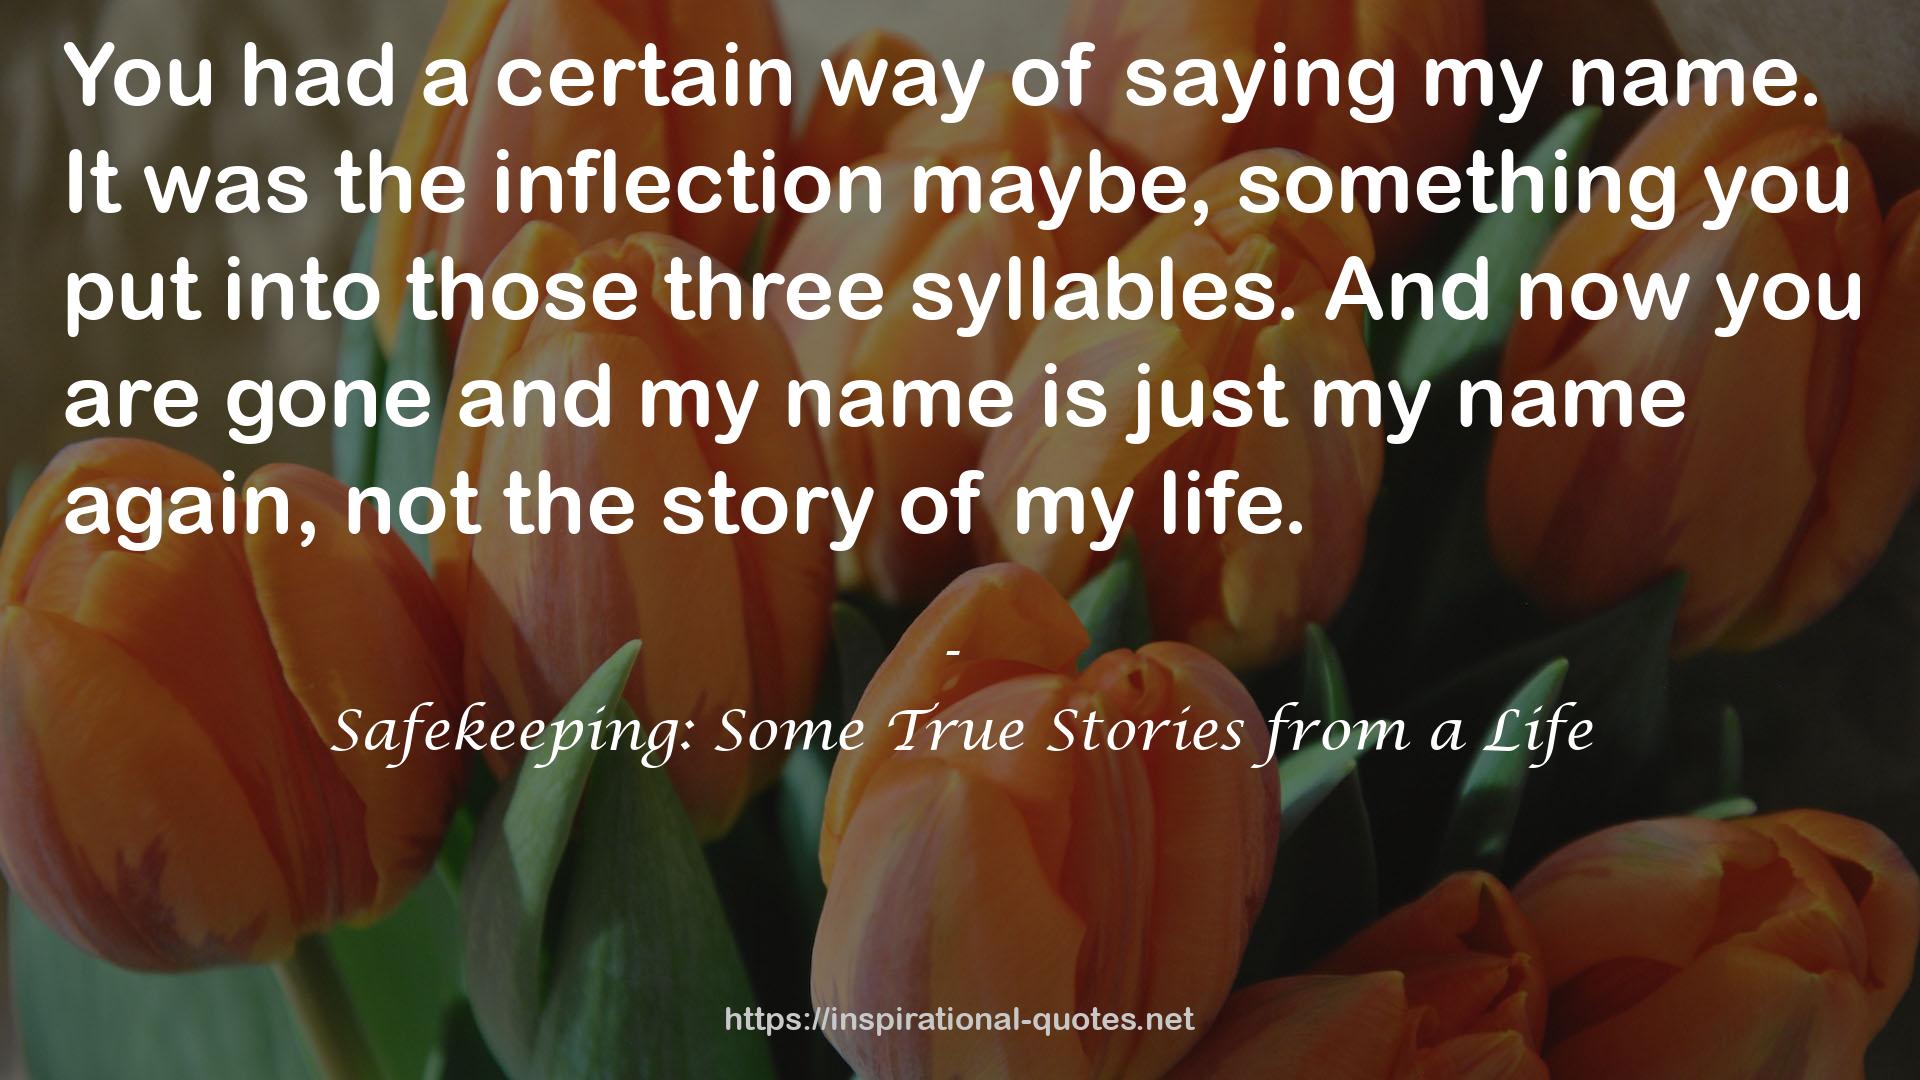 Safekeeping: Some True Stories from a Life QUOTES